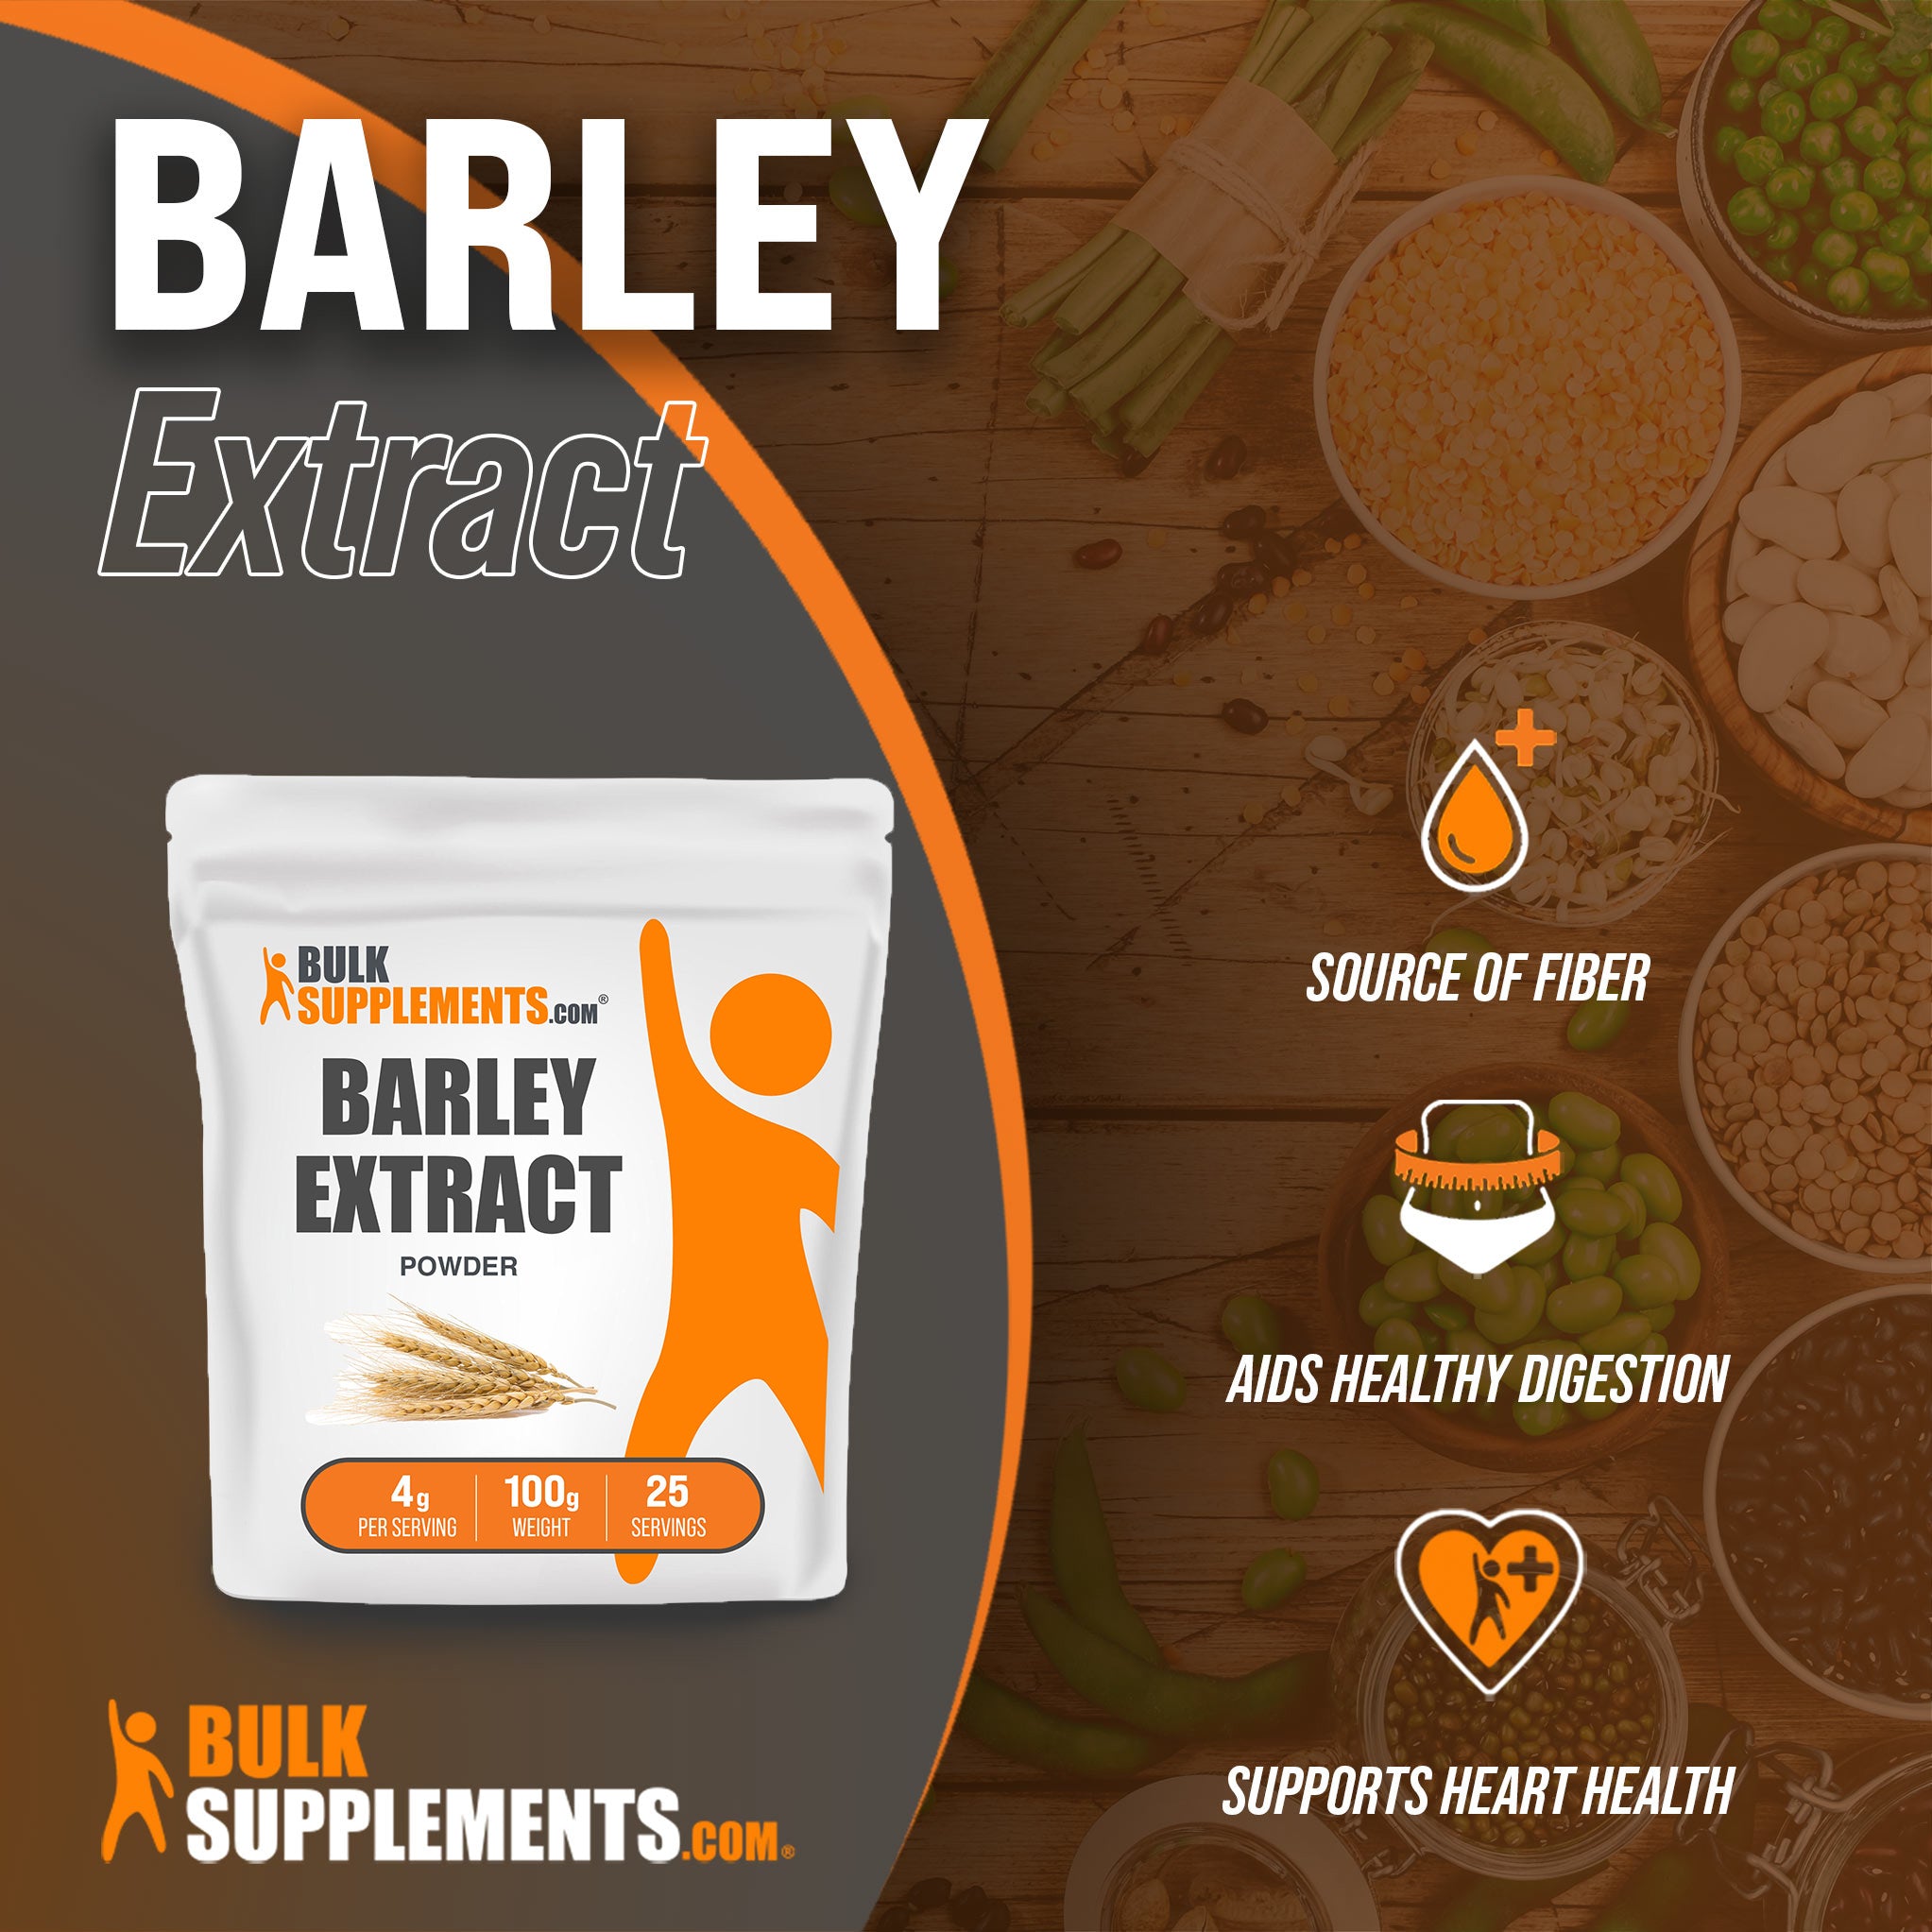 Barley Extract Powder from Bulk Supplements for a good source of fiber 